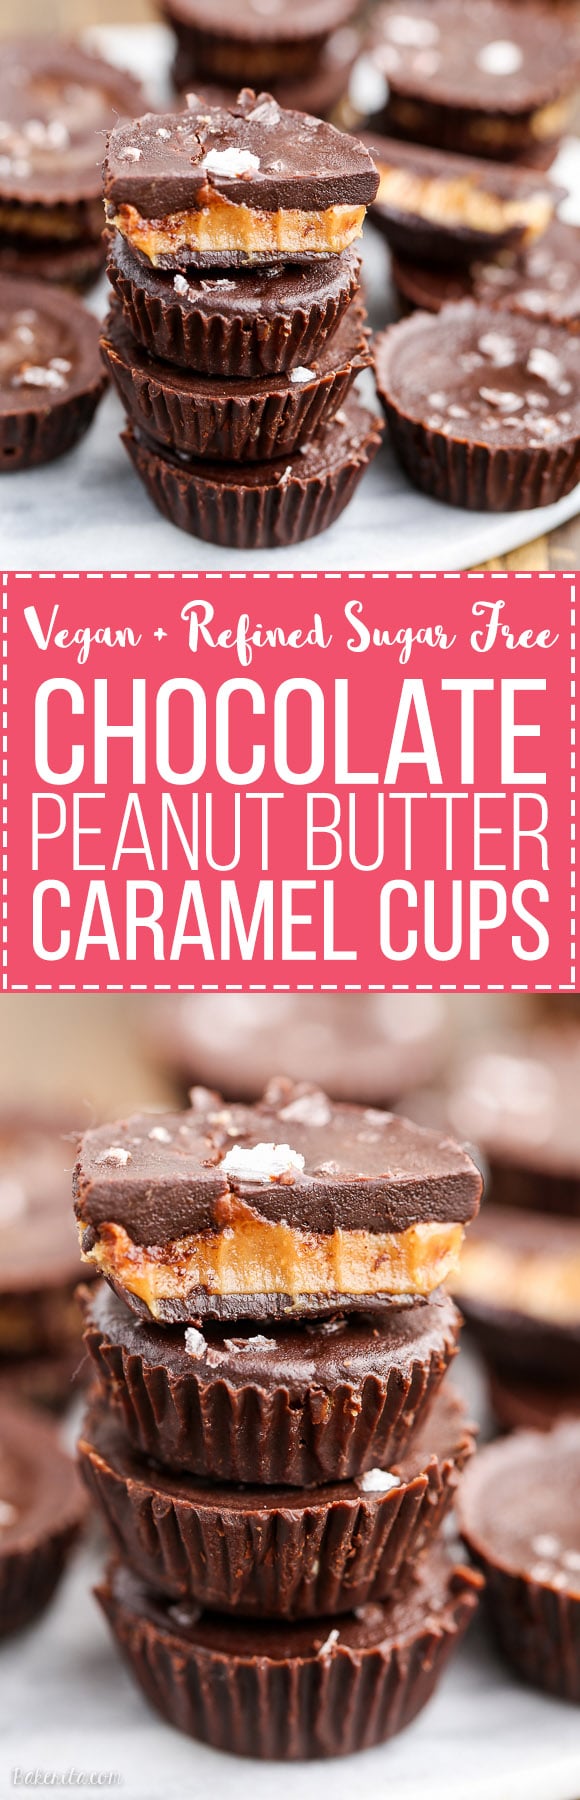 These Chocolate Peanut Butter Caramel Cups are made with homemade chocolate surrounding a gooey vegan peanut butter caramel. These refined sugar free treats are the perfect way to get your candy fix!